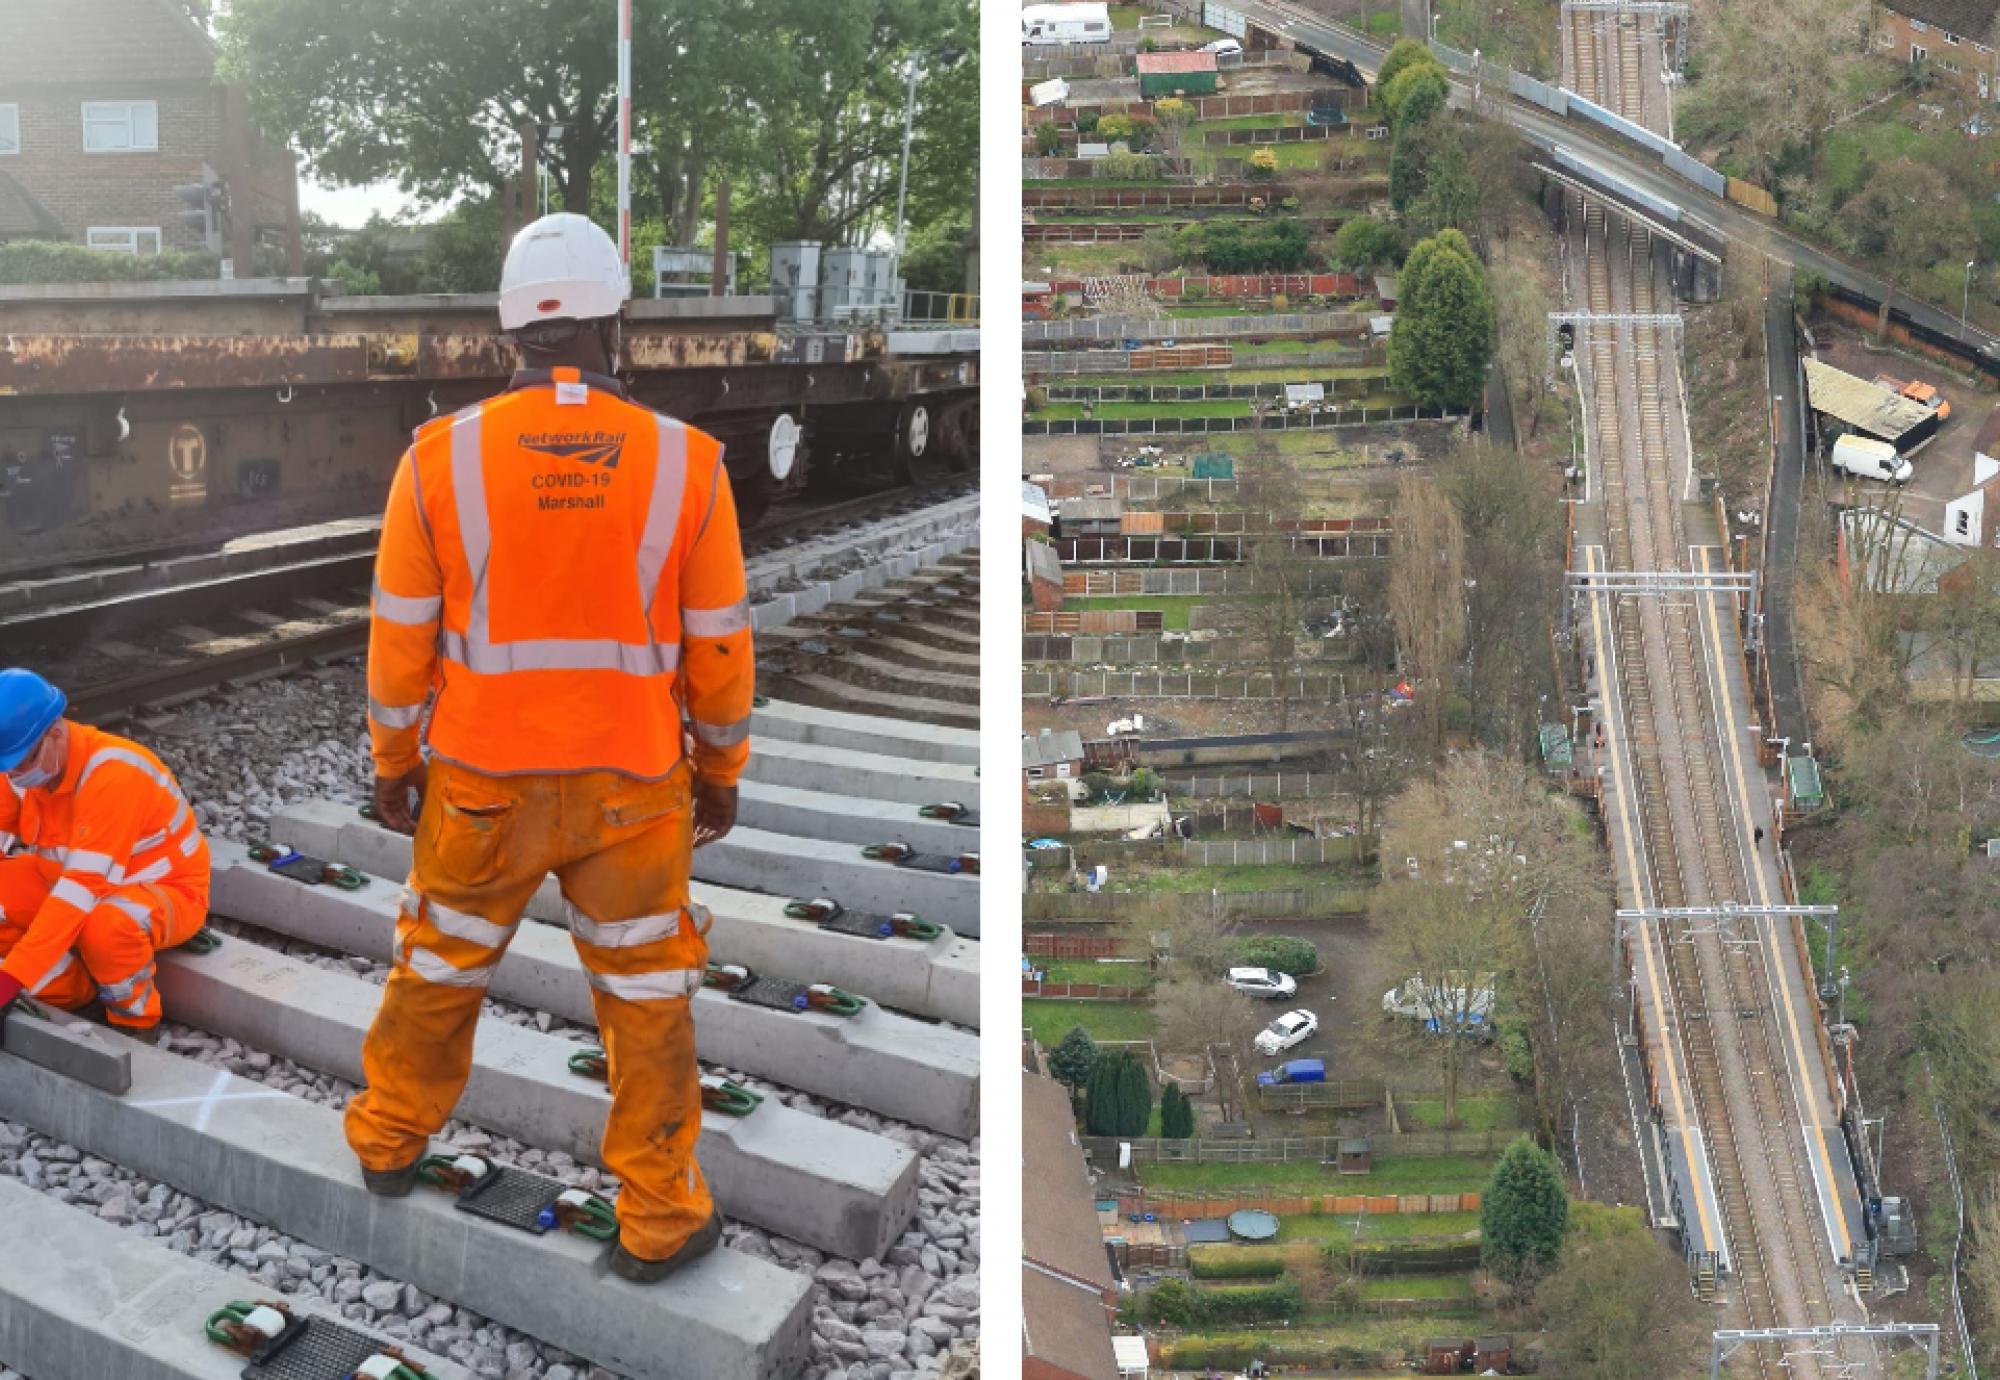 Track workers and Bloxwich station aerial composite